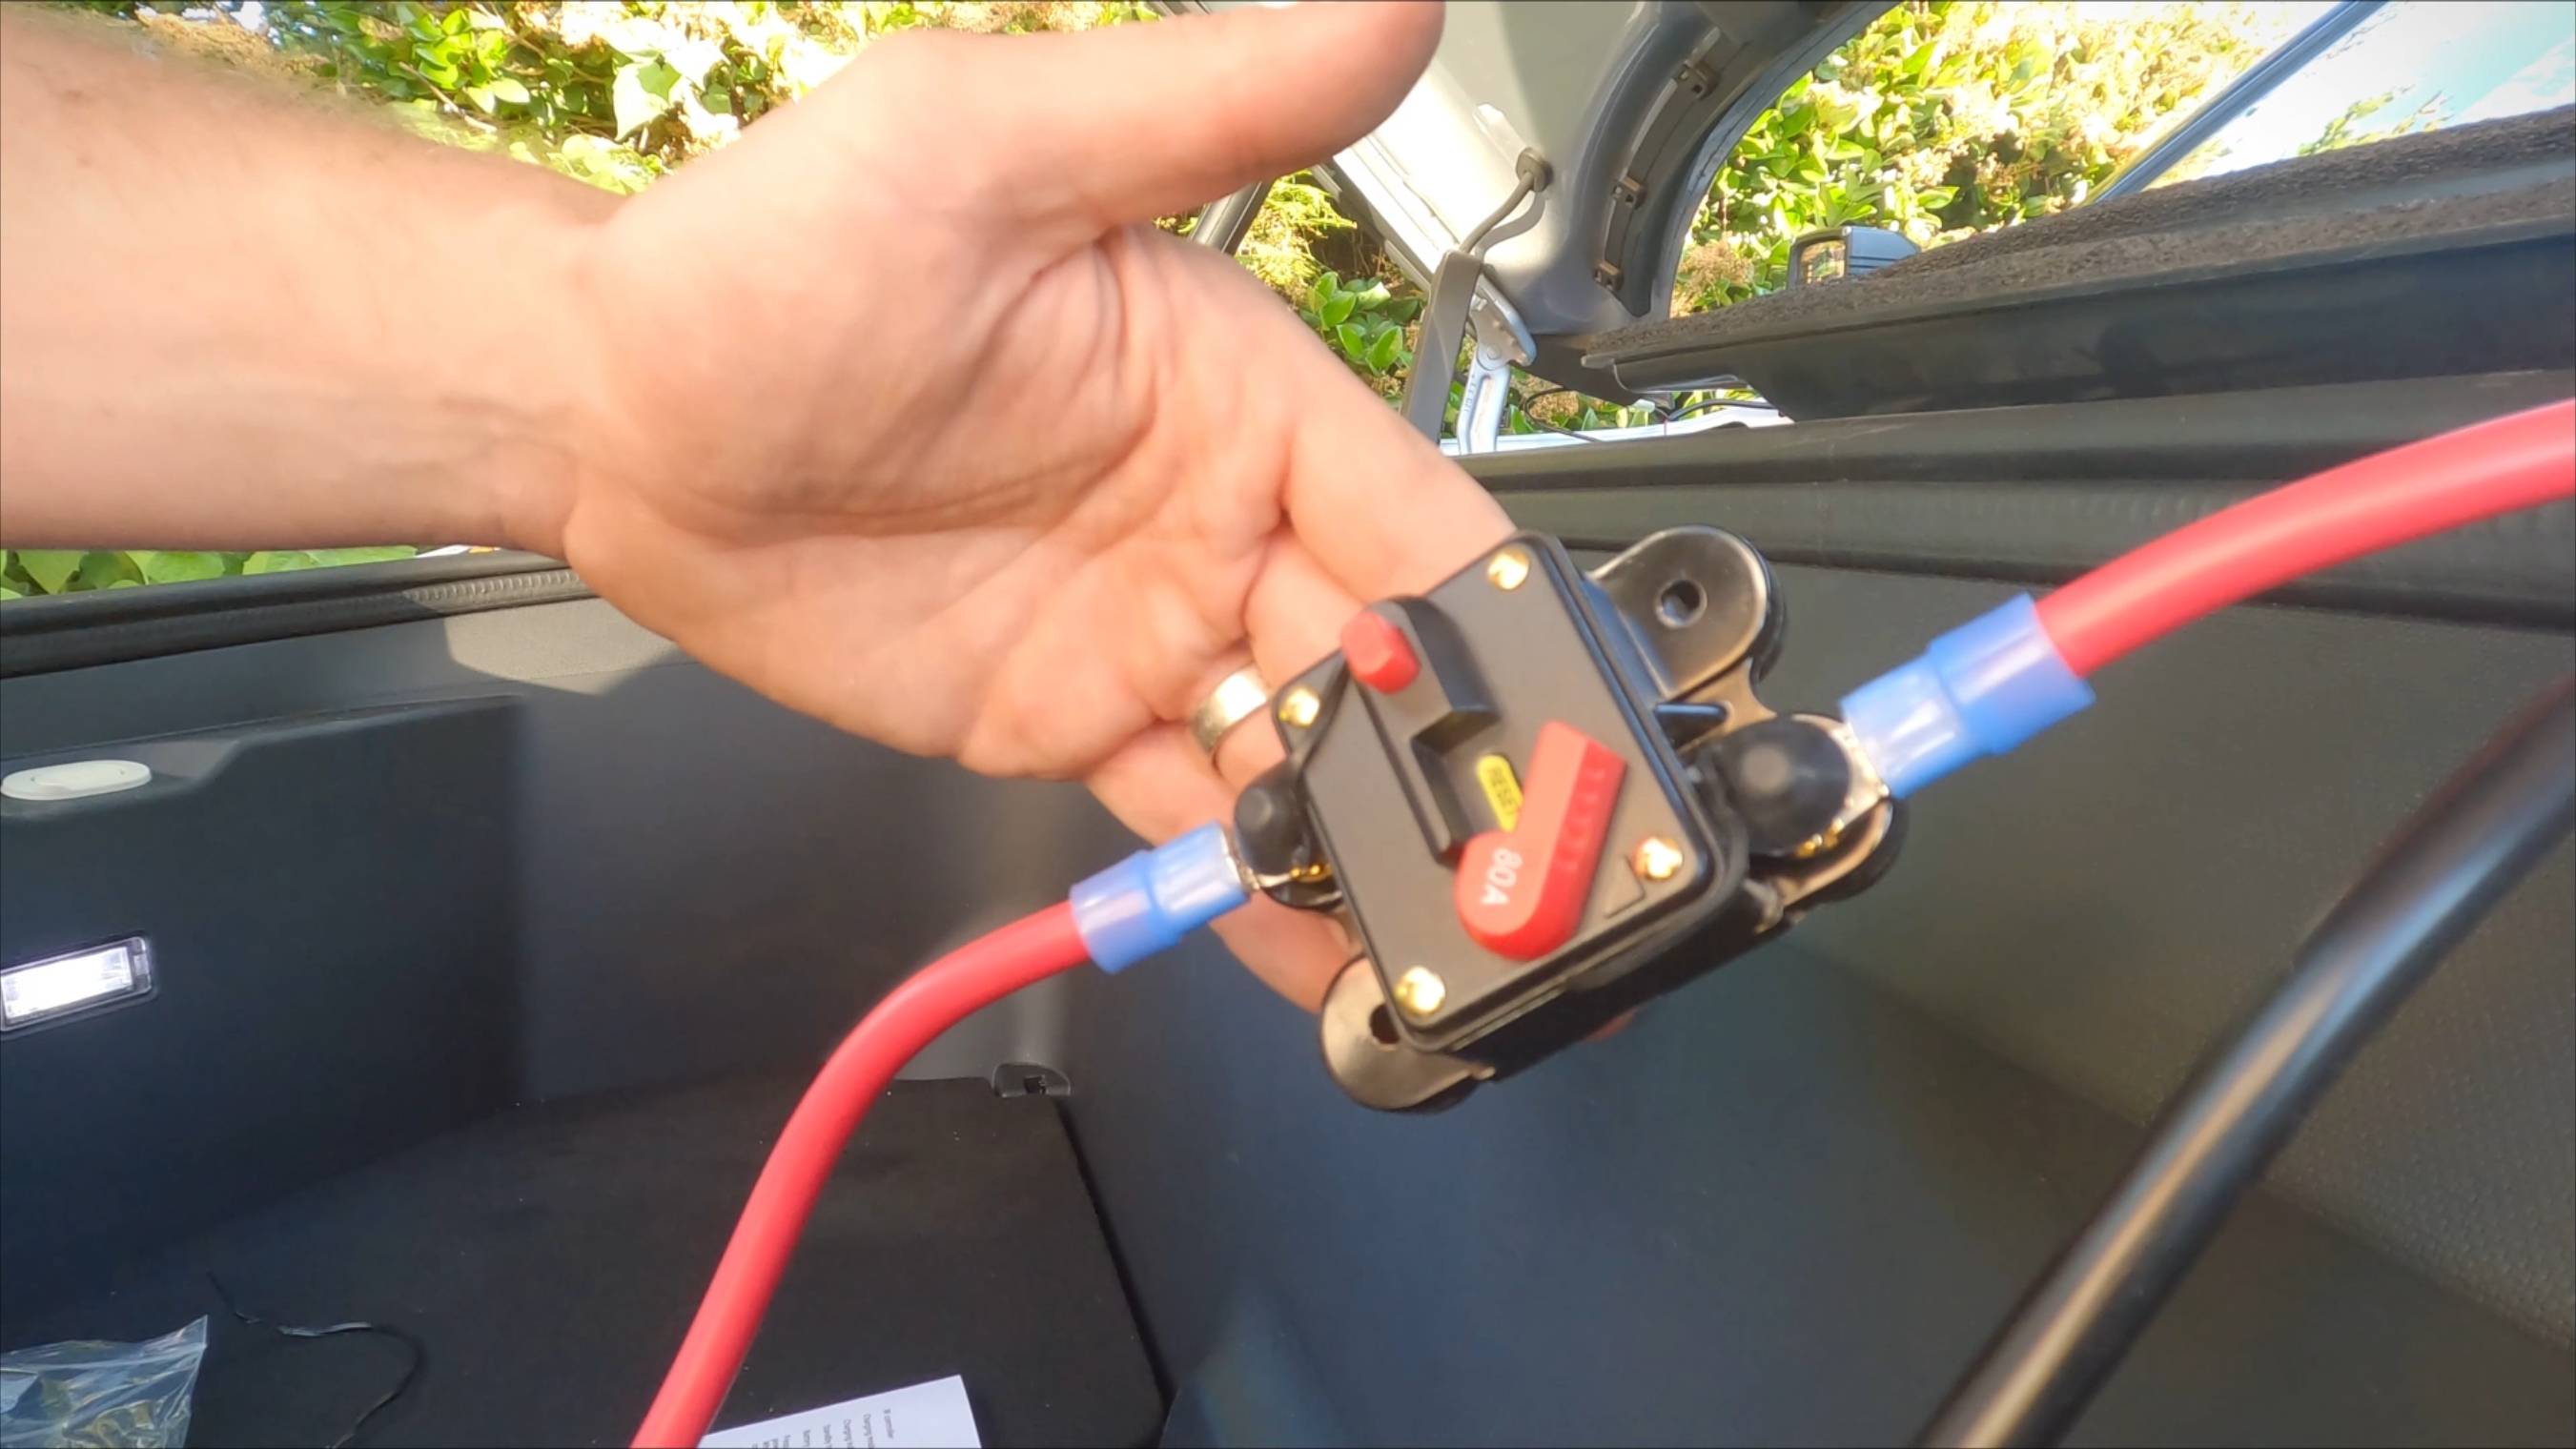 mike owner of M&R automotive shows you to turn off power to joinfworld 8 gang wireless wiring harness